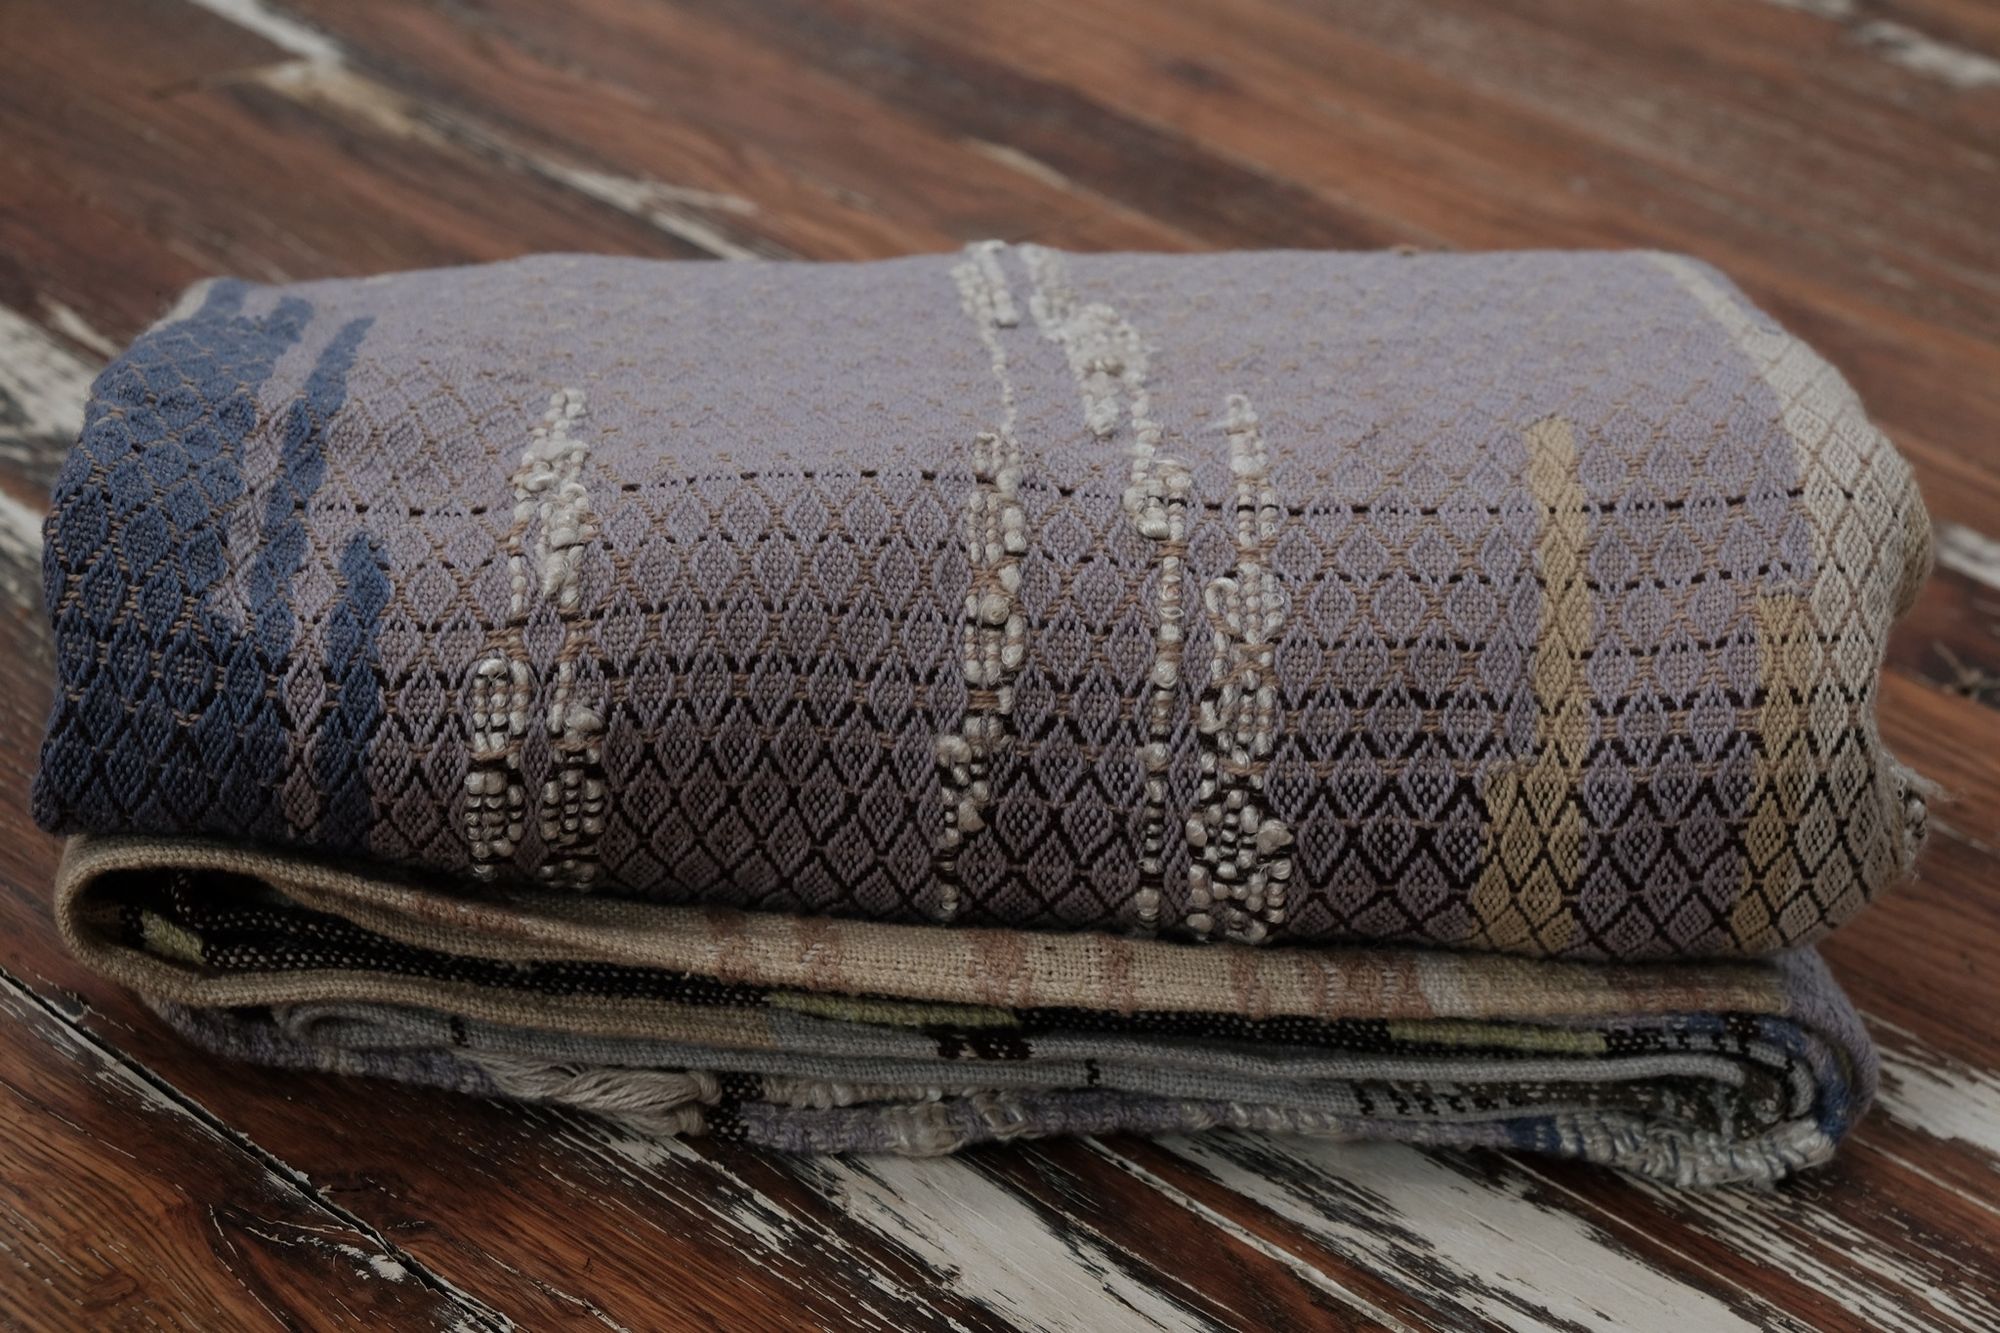 A long piece of handwoven fabric with diamond pattern in lilac purple, dark brown and earth tones is folded on a wooden floor